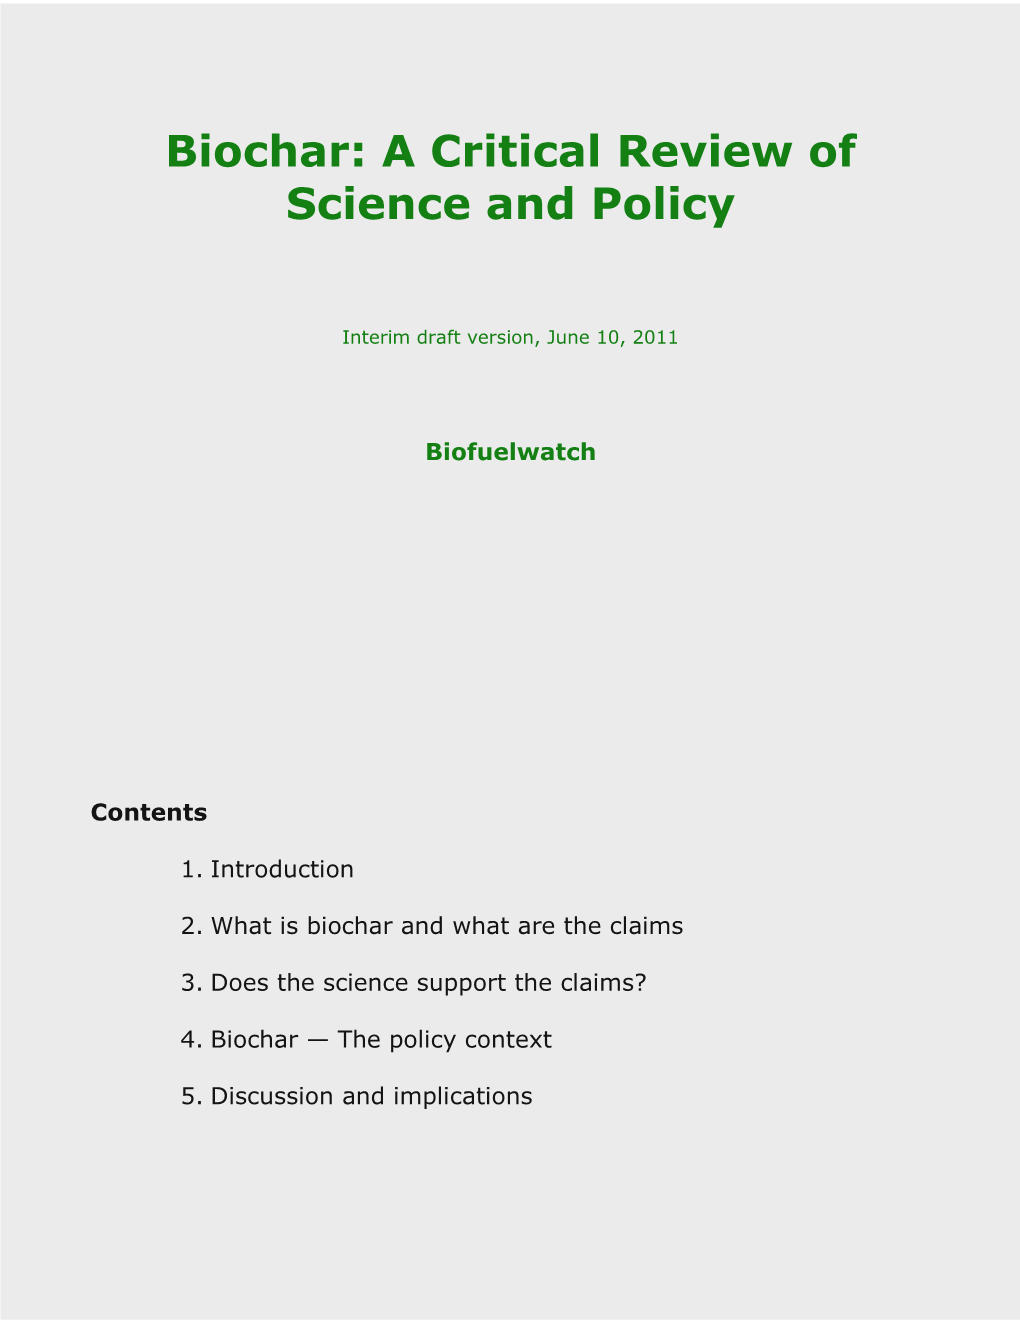 Biochar: a Critical Review of Science and Policy